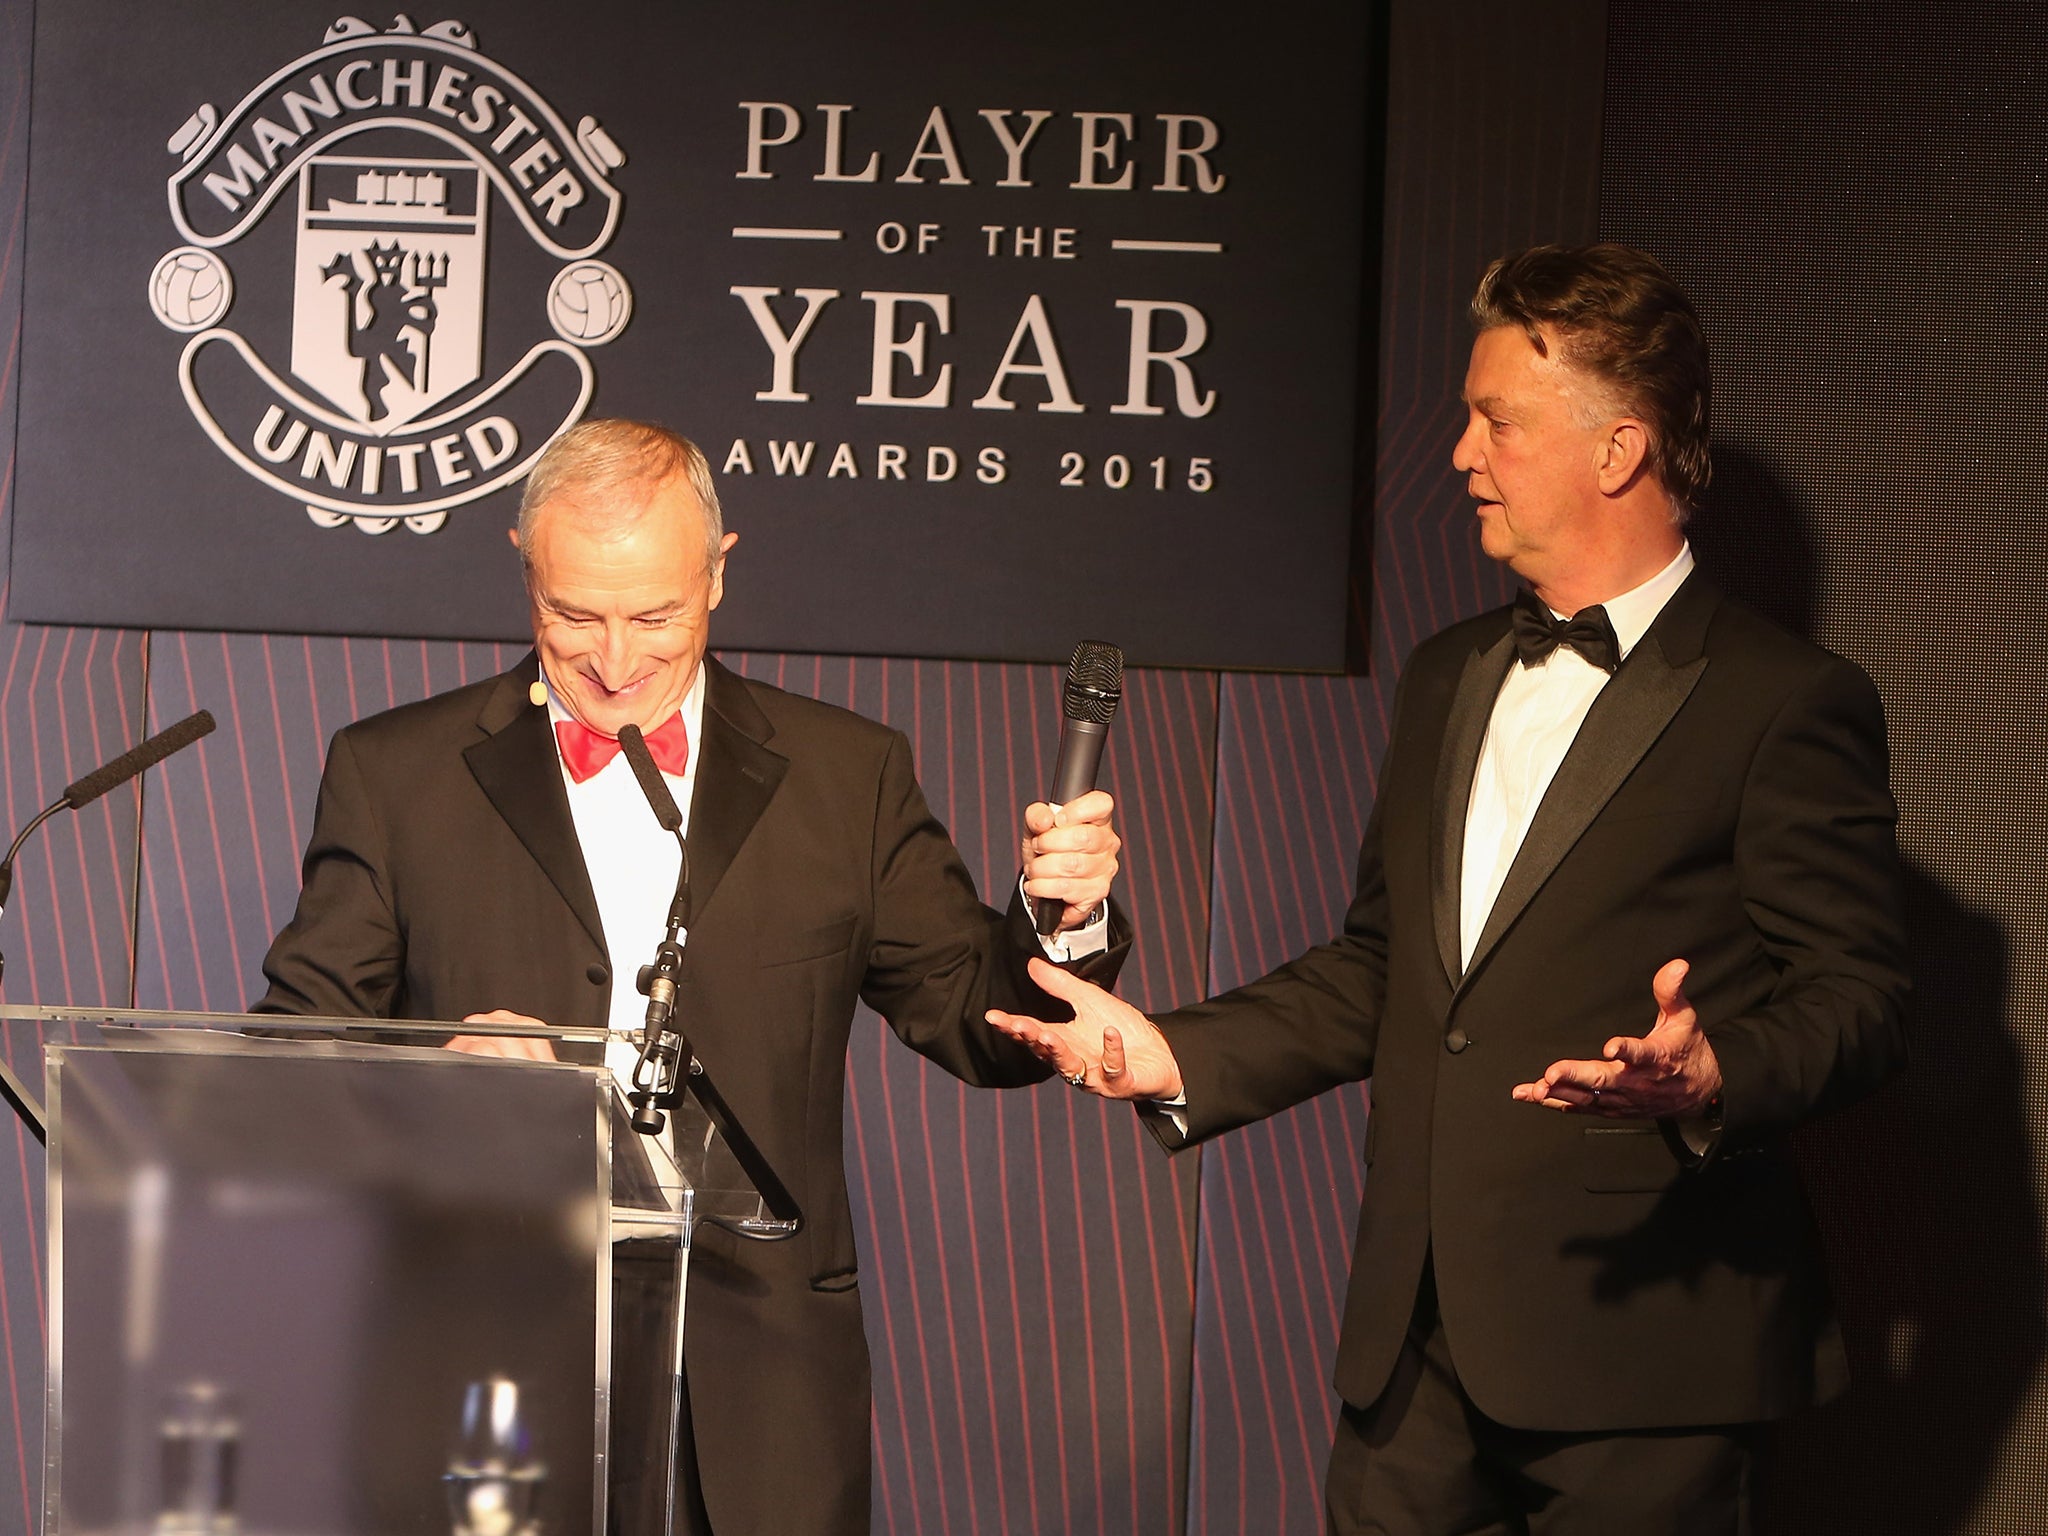 Louis van Gaal at Manchester United's awards evening